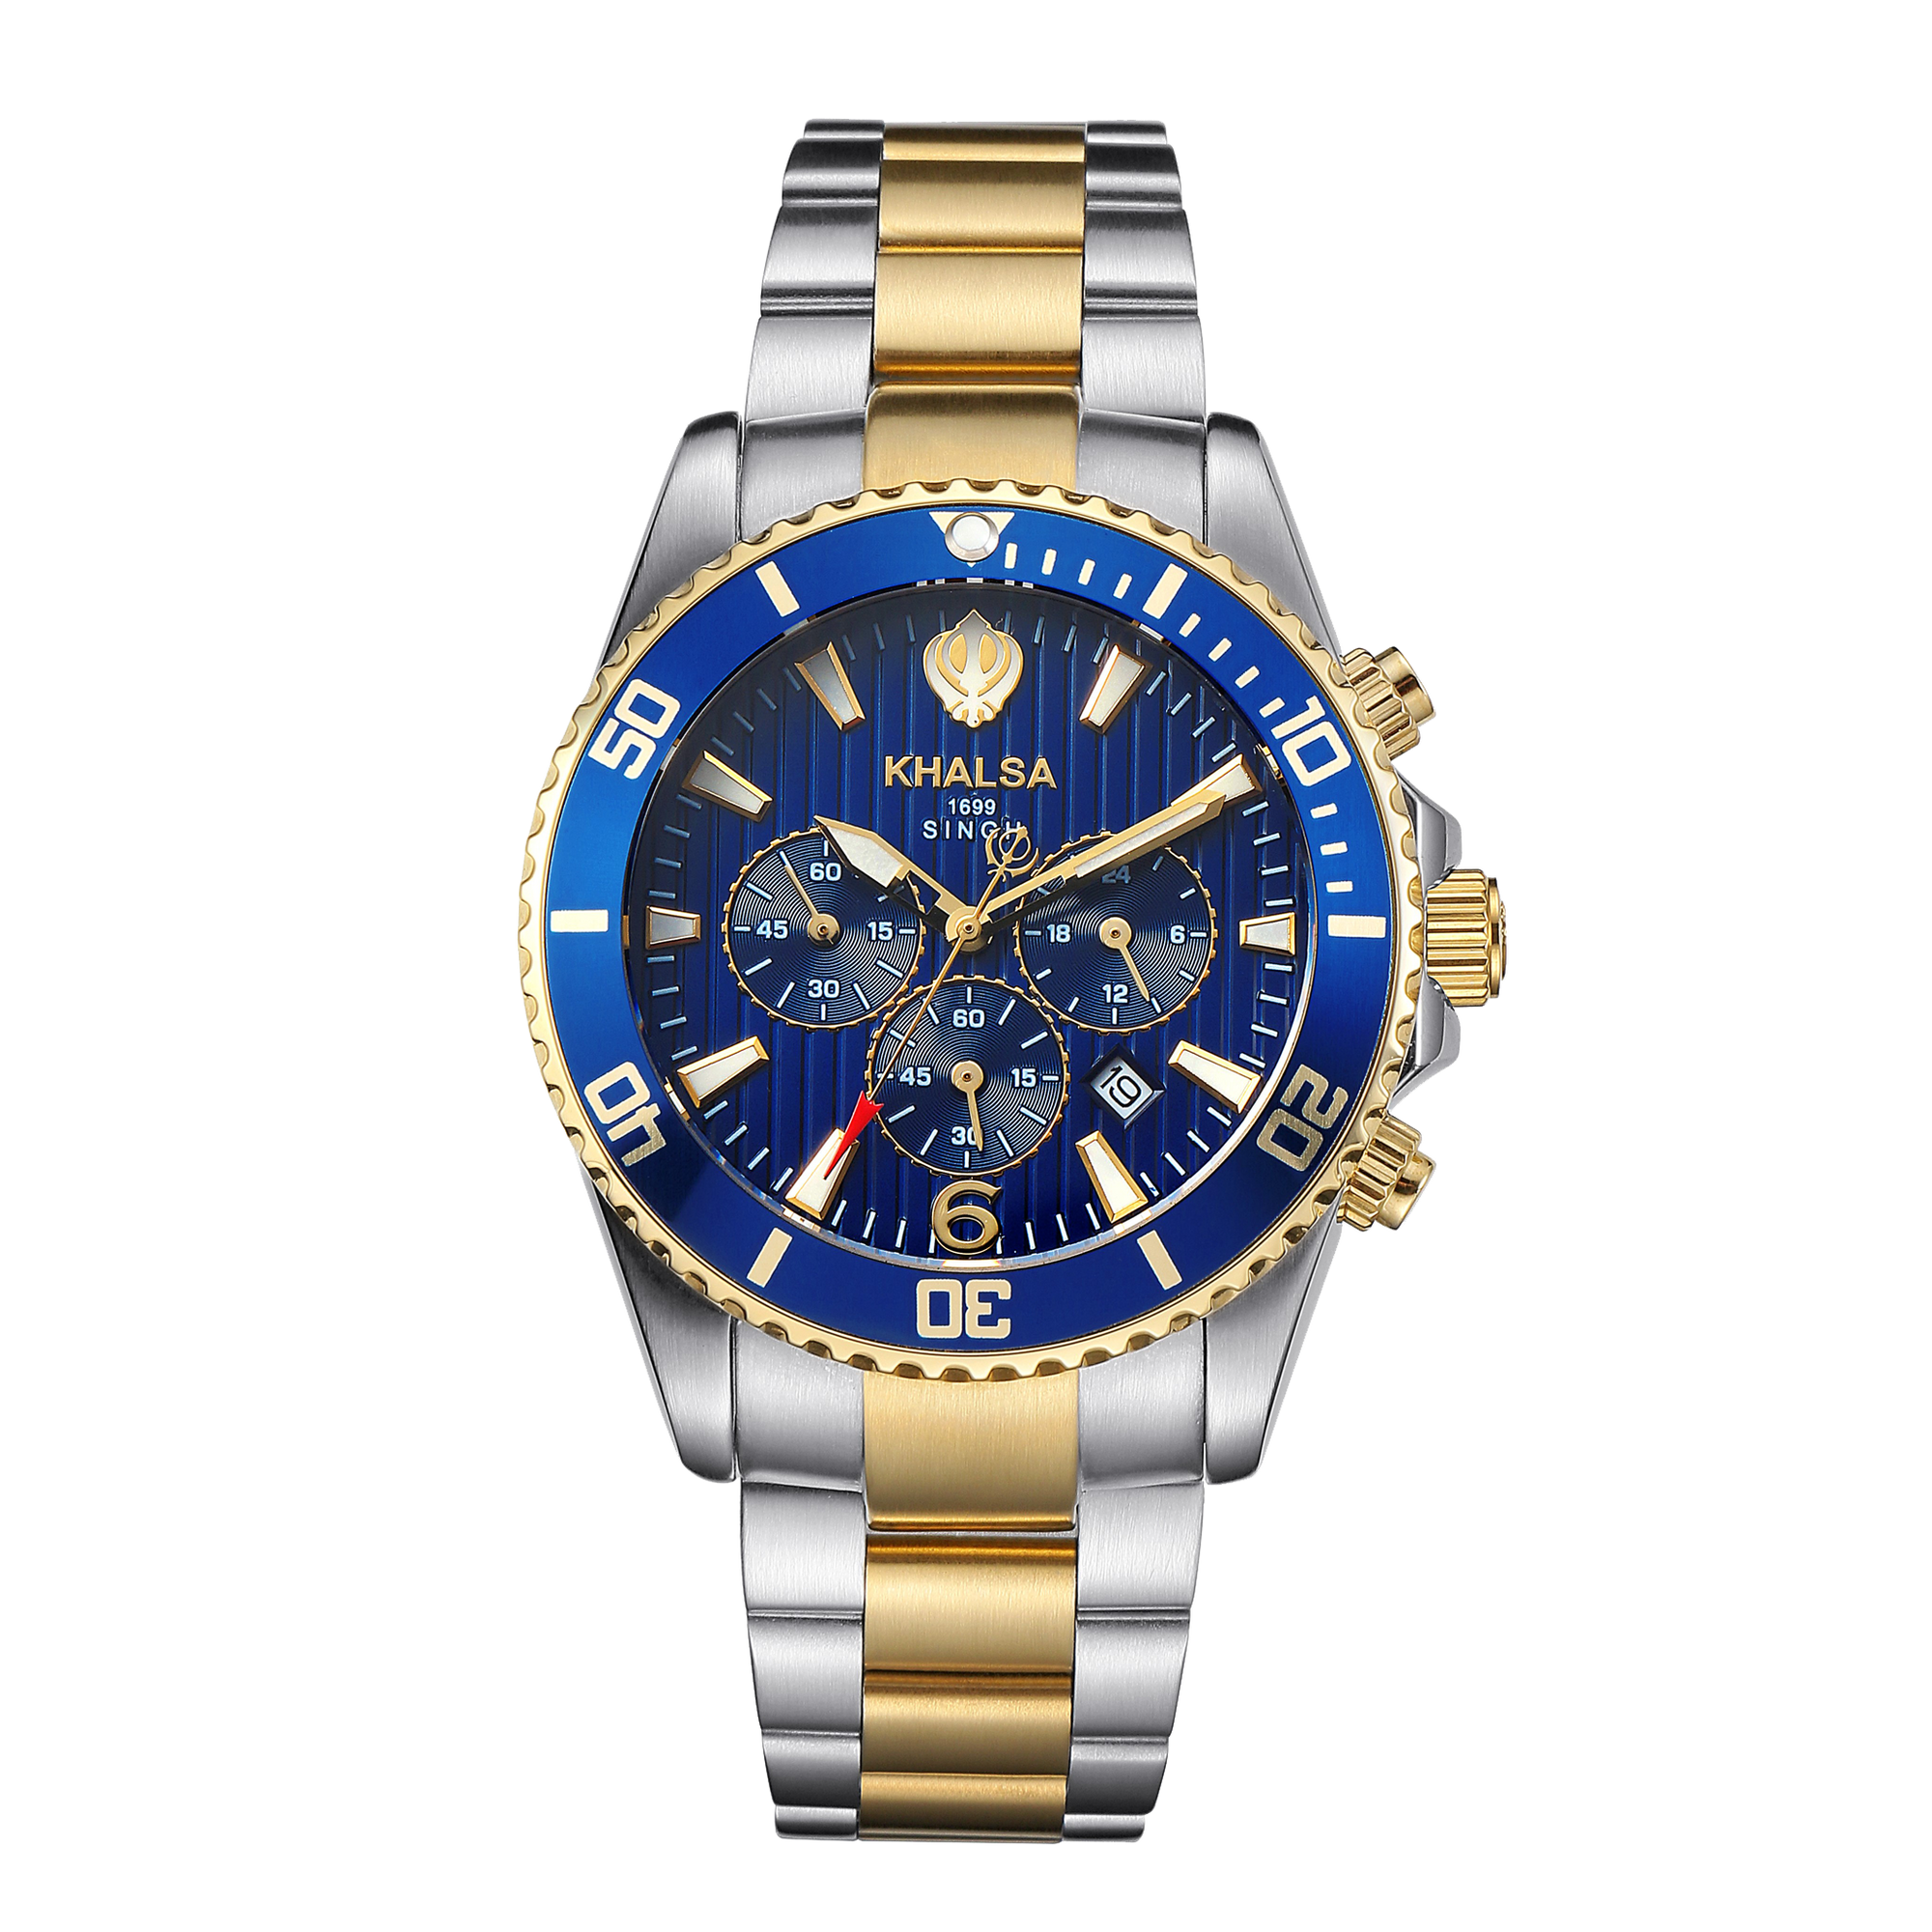 Singh Blue Luxury Swiss Sikh Watch with Khanda Symbol, Lion's Head, and Gold Plated Case - Super Luminous